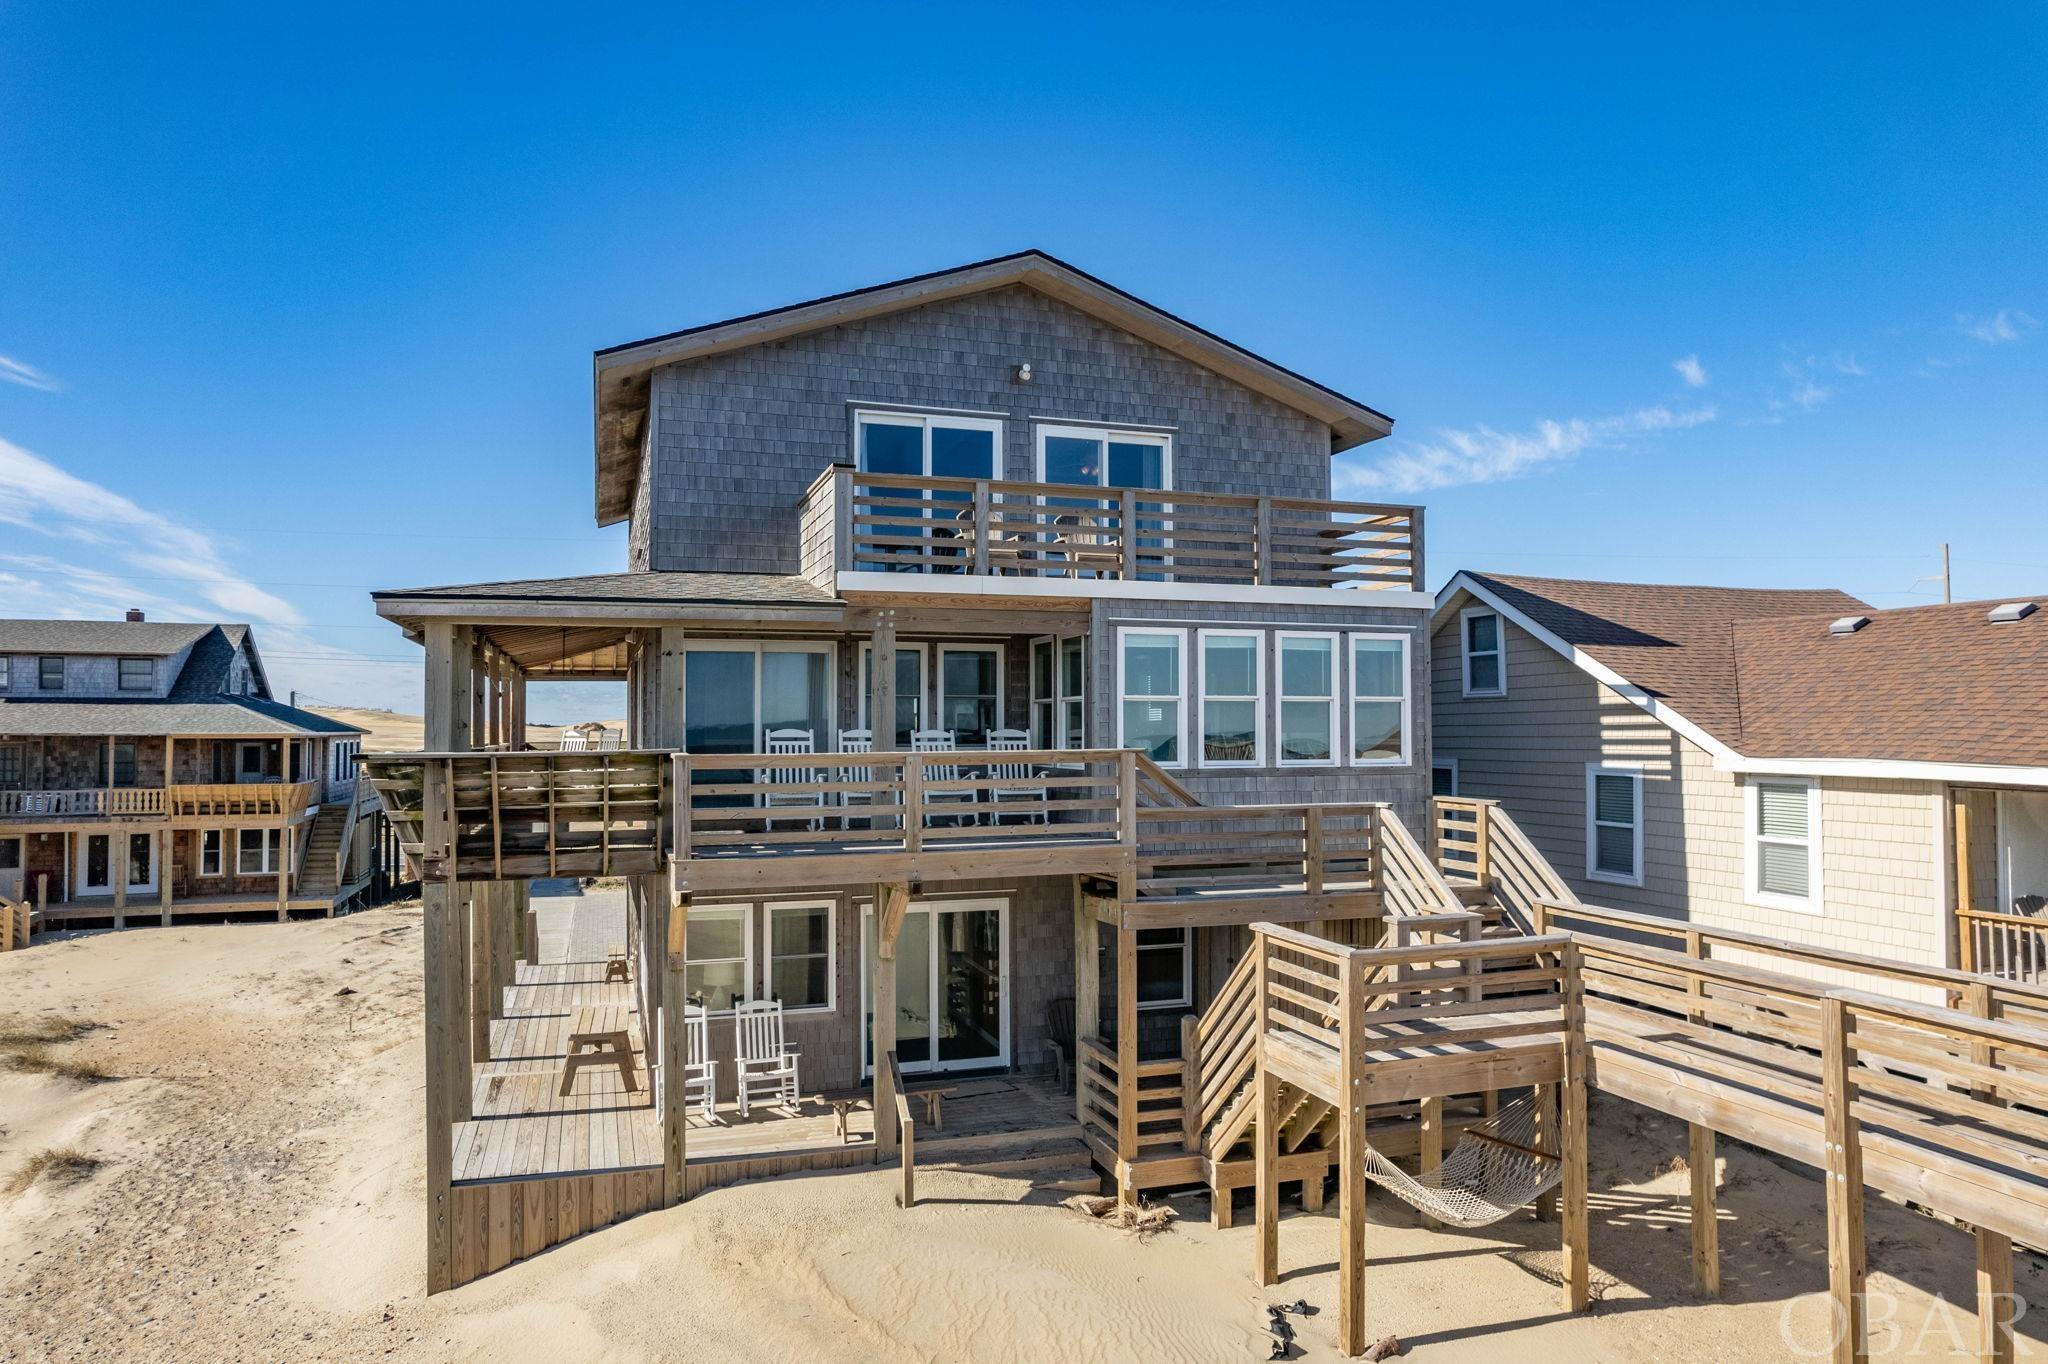 This indeed is a very rare opportunity for you to own in the unpainted aristocracy of Cottage Row in Nags Head. Listed on the National Register of Historic Places in the Old Nags Head District, this 7-bedroom, 6 full-bath home has been thoughtfully and intentionally upgraded without sacrificing any of its original charms. The traditional Nags Head Cottage design with wrap-around porches and abundant windows affords dazzling ocean views to the east and breathtaking sunsets over Jockey's Ridge to the west. Enjoy traditional style living on the open-concept main level with incredible views of the Atlantic and a nostalgic fireplace that beckons cozy, family gatherings. On the top level, you'll find four spacious bedrooms, two with en-suite baths and access to open decks for private sun tanning or ocean gazing, and two with a shared bath and incredible views of Jockey's Ridge. In 2019, three additional bedrooms and a den completed on the lower level with wet bar were added to this home. Outdoors you'll discover easy access to the beach, more seating areas and an outdoor shower. This property offers so much with its modern amenities while retaining its original Nags Head design. It's definitely a must-see!